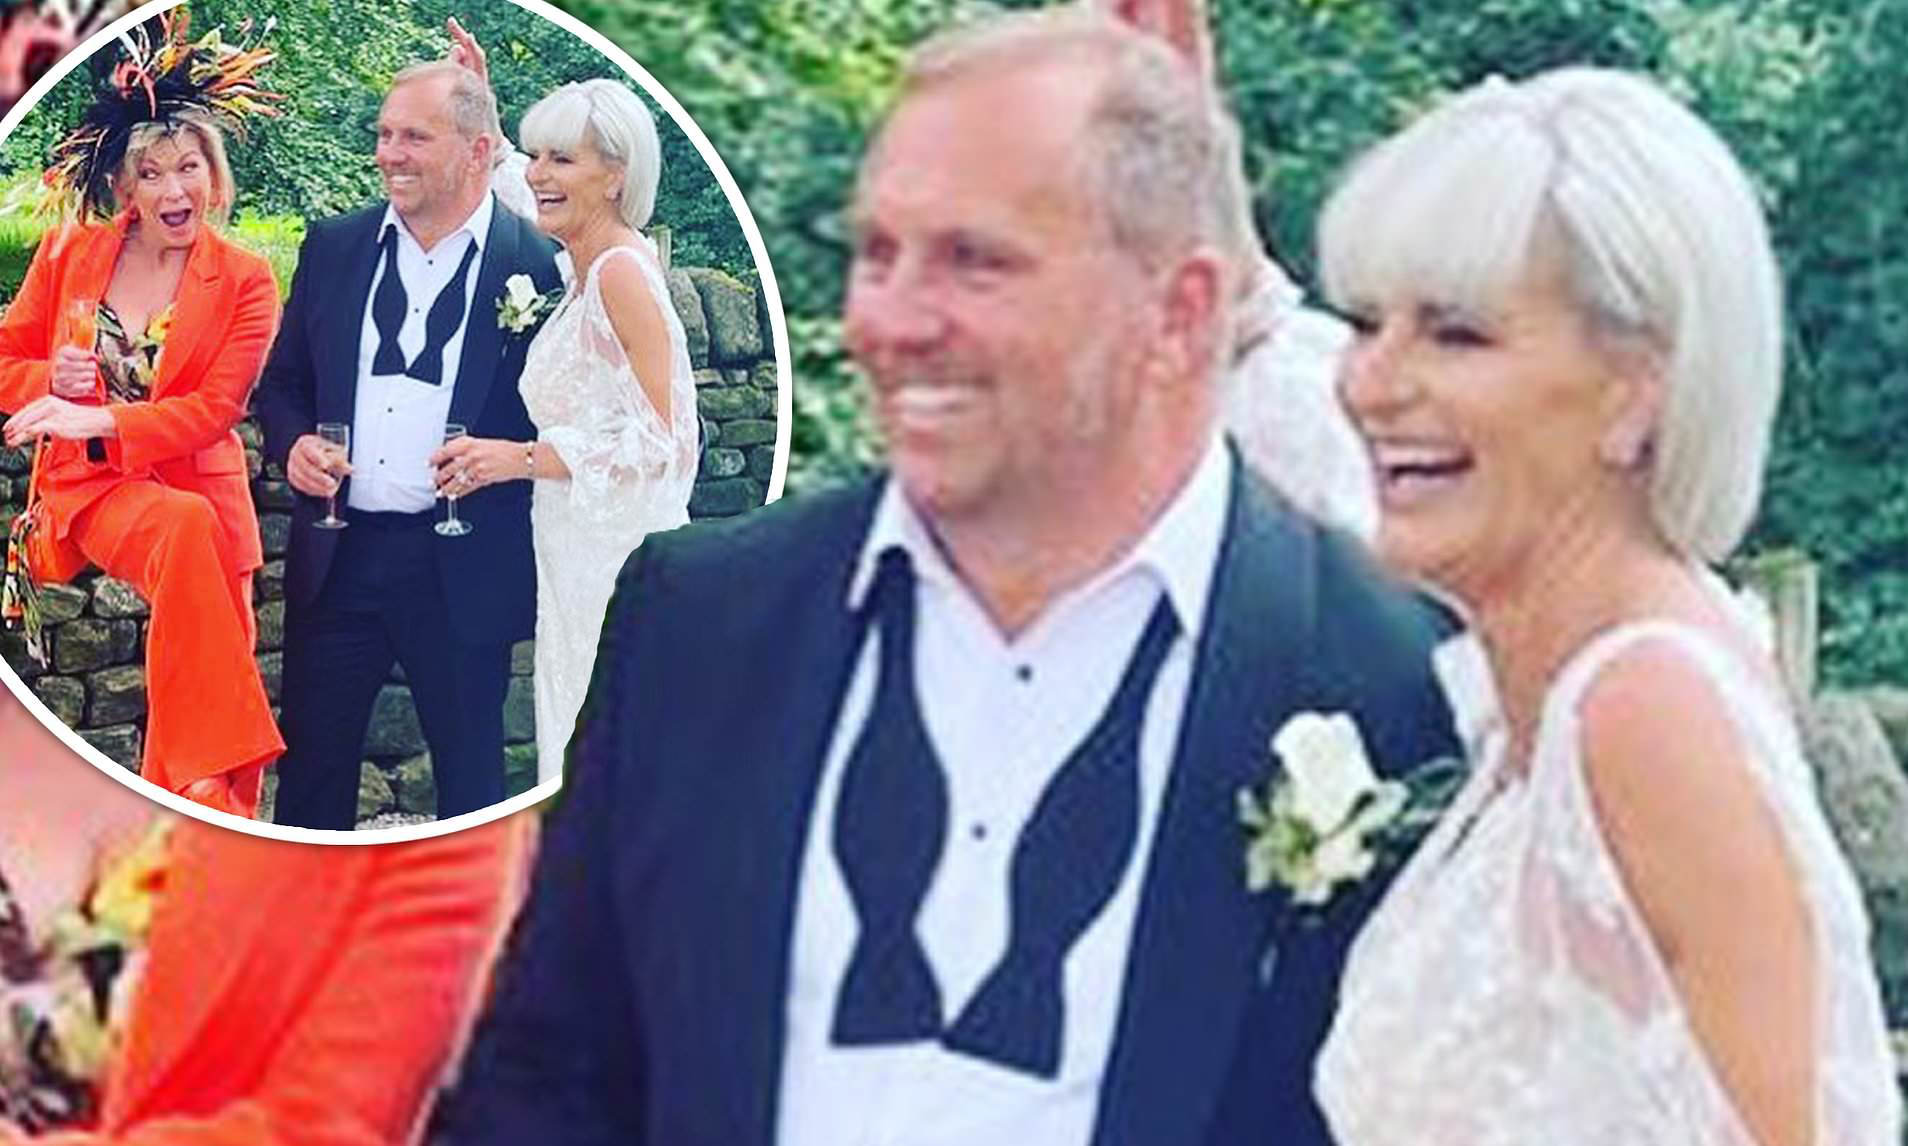 Emmerdale's Dean Andrews marries fiancée with soap wife in attendance